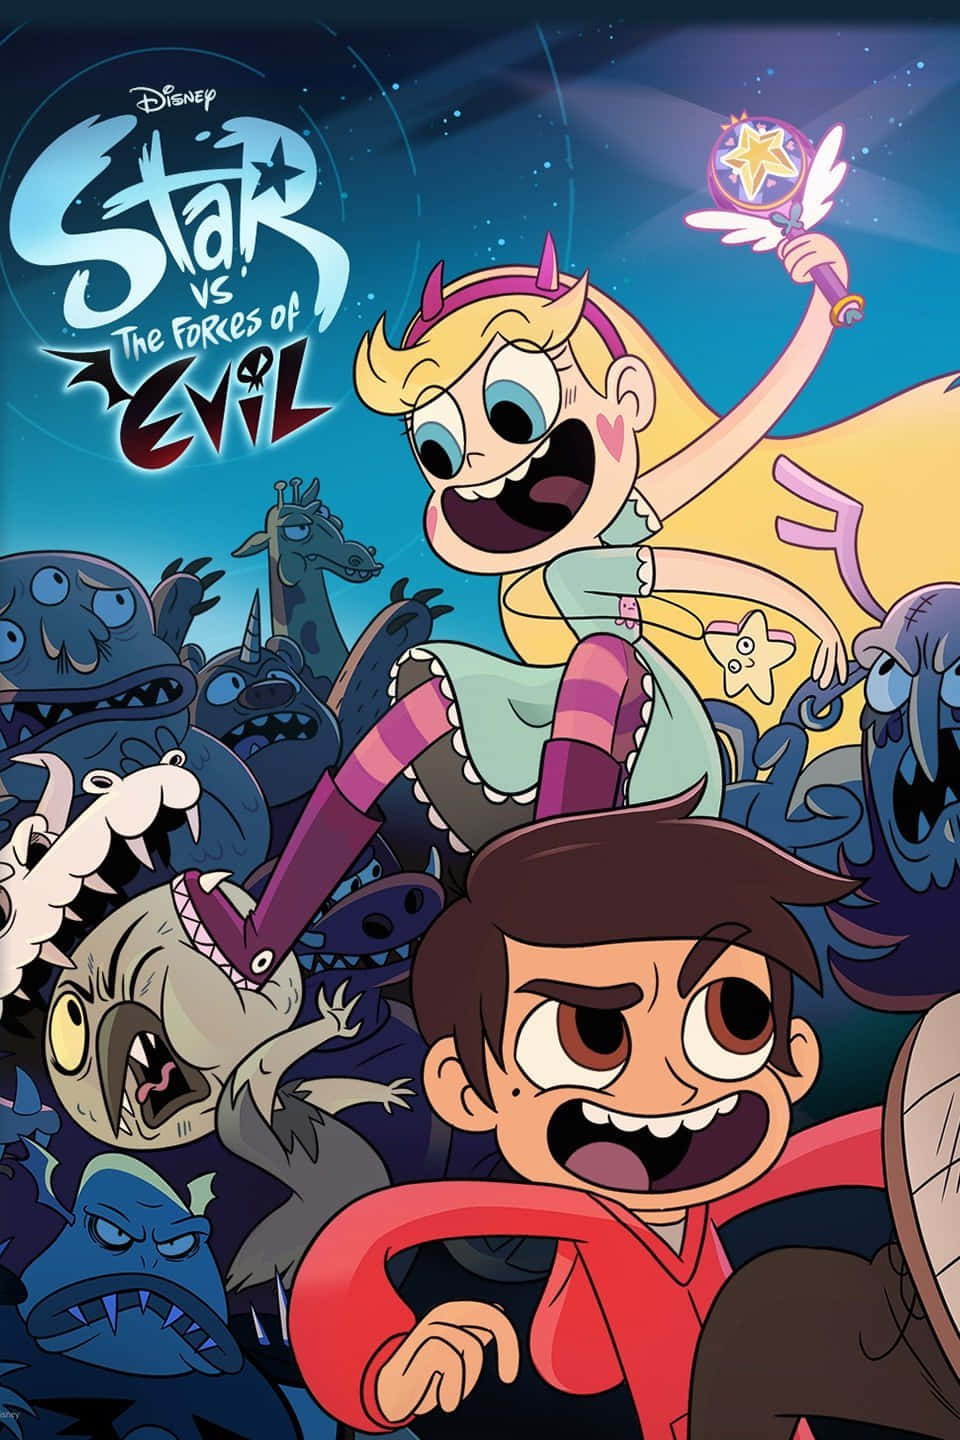 "Star Butterfly and Marco Diaz ready for battle in Star Vs The Forces of Evil"